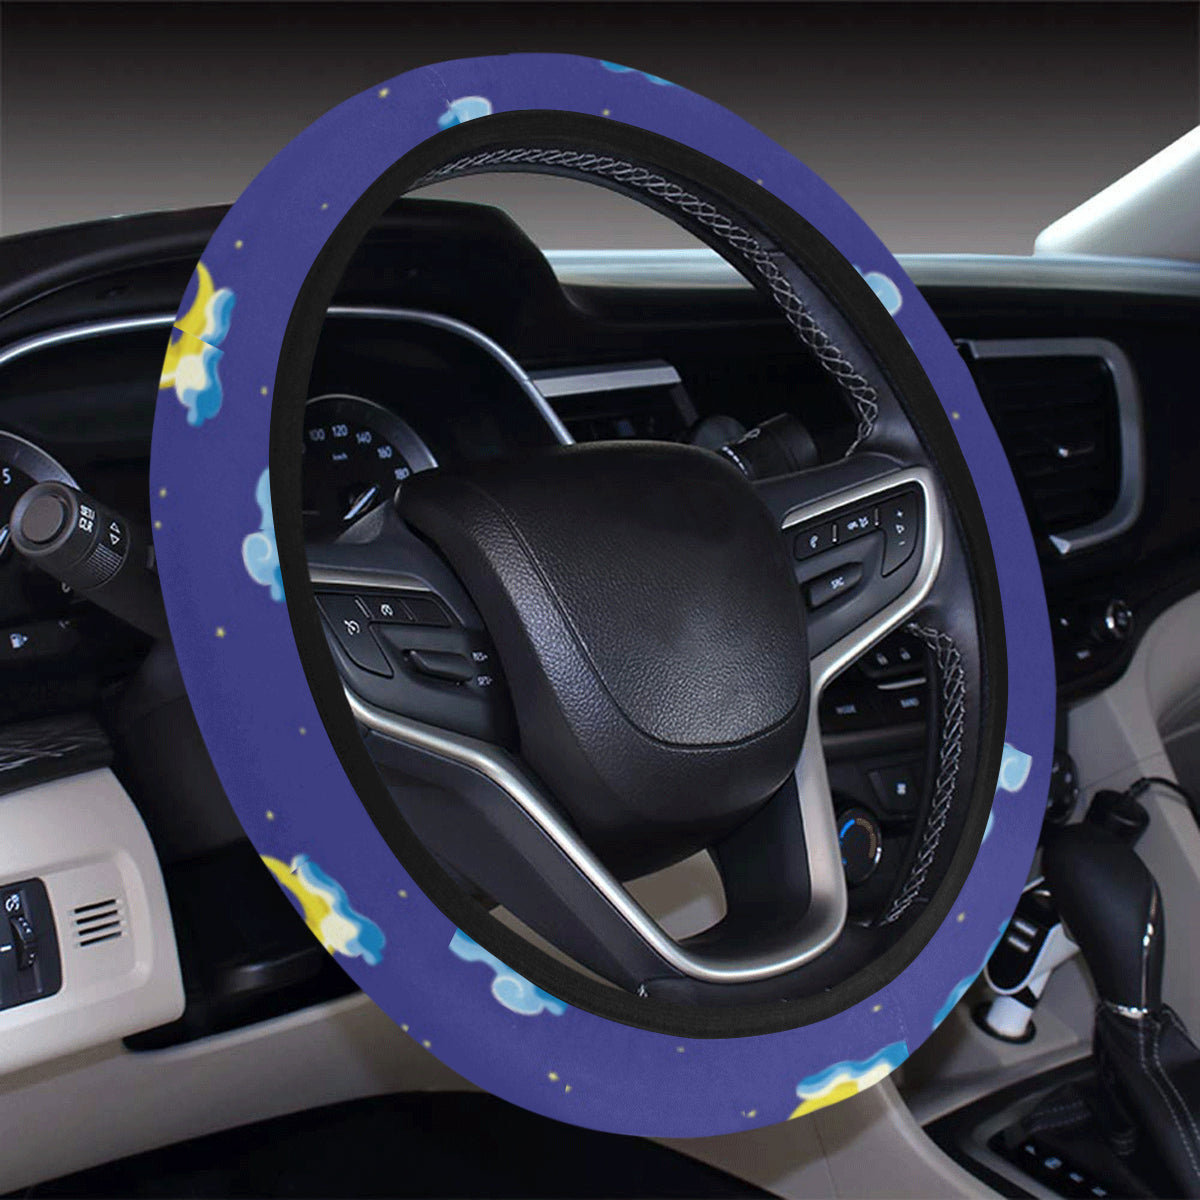 Fairy with Moon Print Pattern Steering Wheel Cover with Elastic Edge